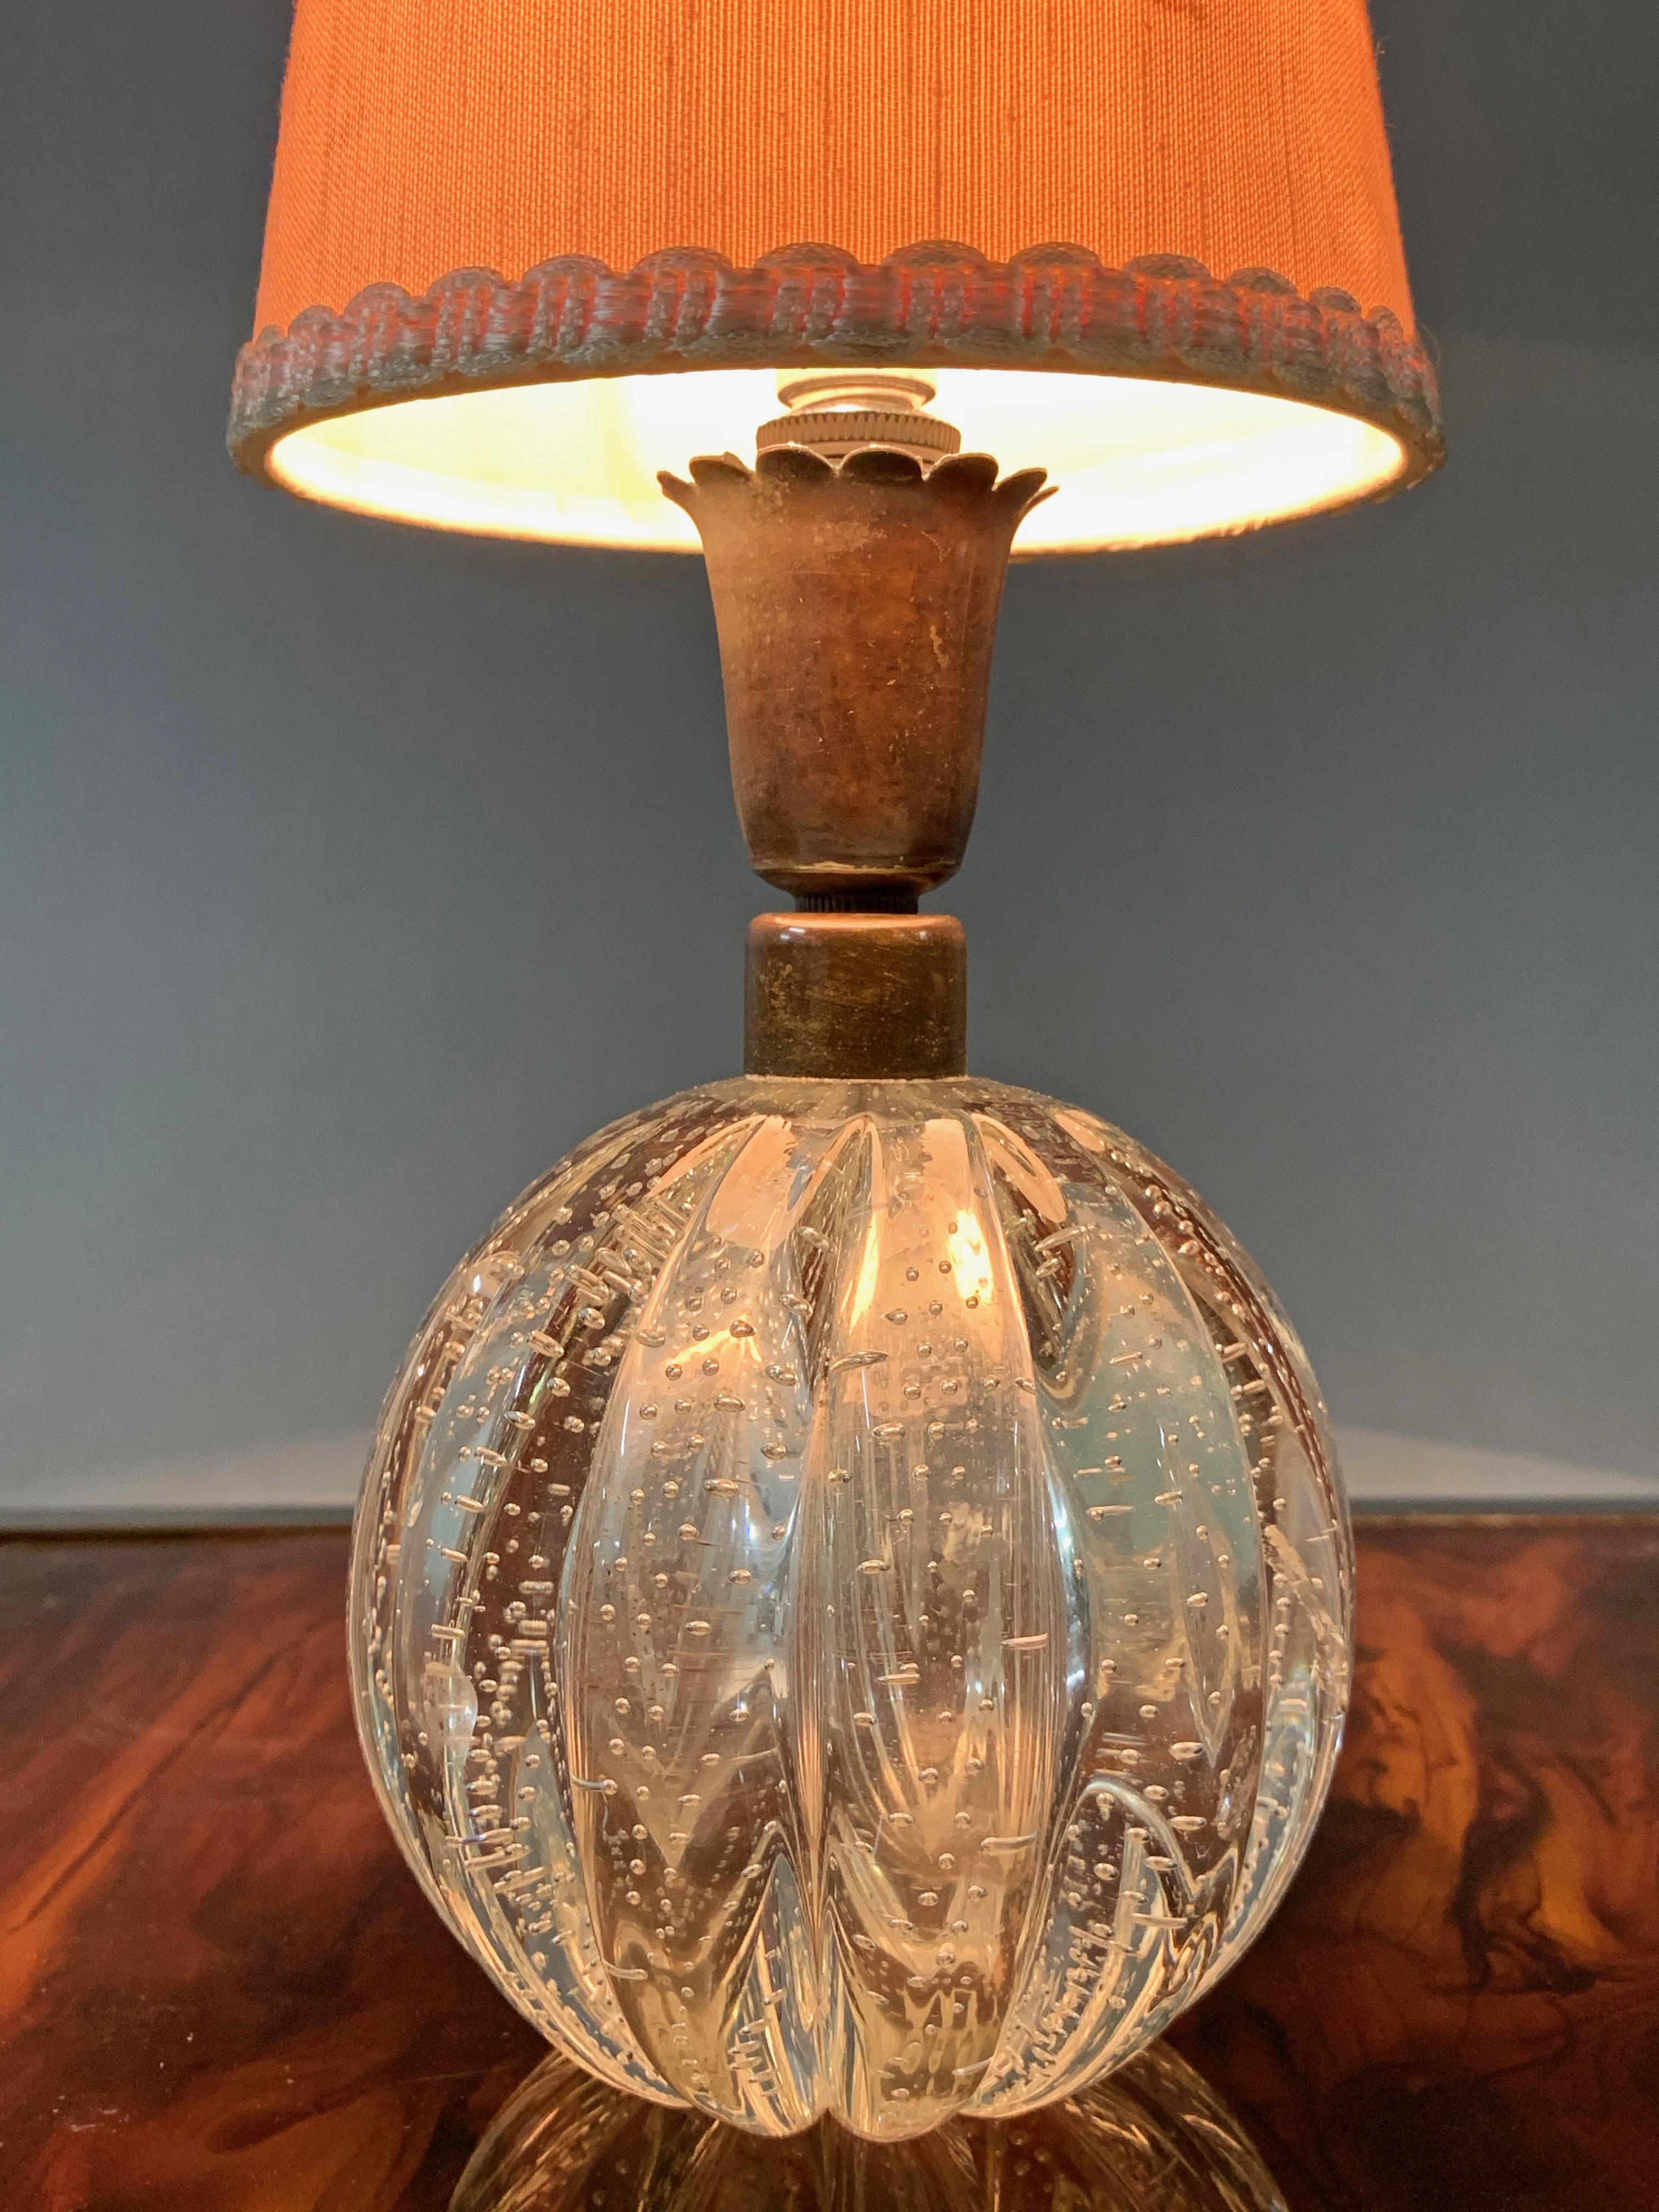 Magnificent midcentury Murano glass ball table lamp. This extraordinary piece was designed by a Murano master artist, Archimede Seguso, in Italy during the 1950s. 

The way the crystal Murano glass was designed is breathtaking, with vertical deep